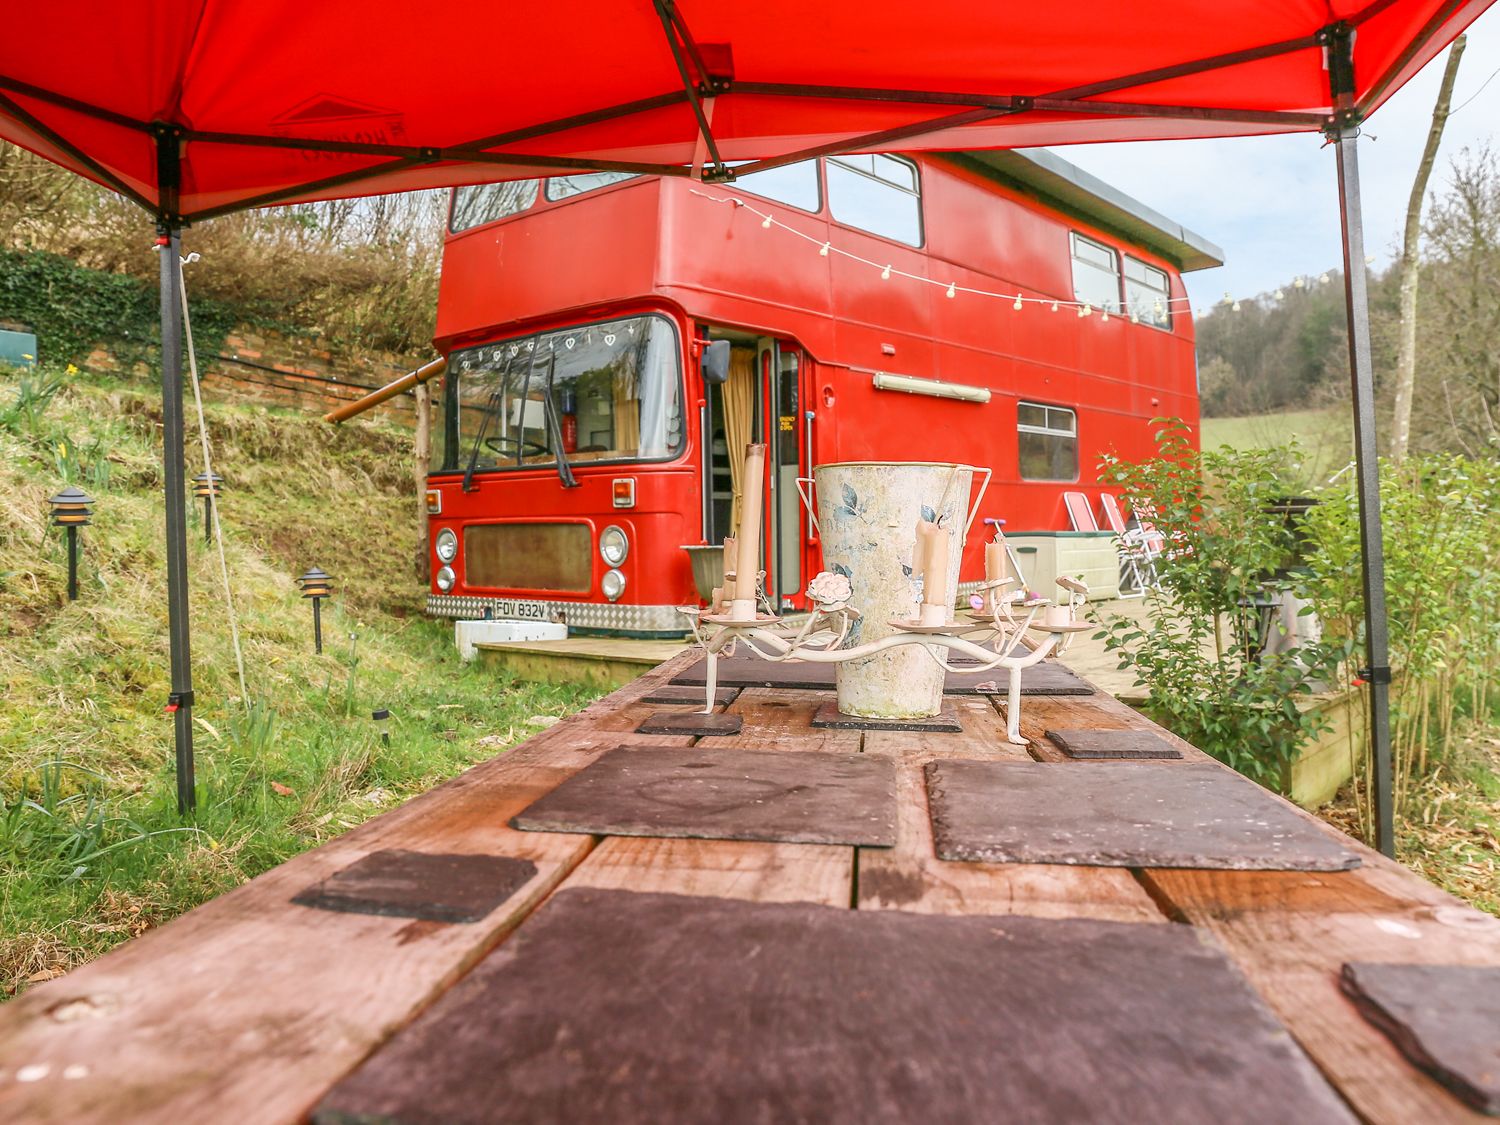 The Red Bus, Herefordshire